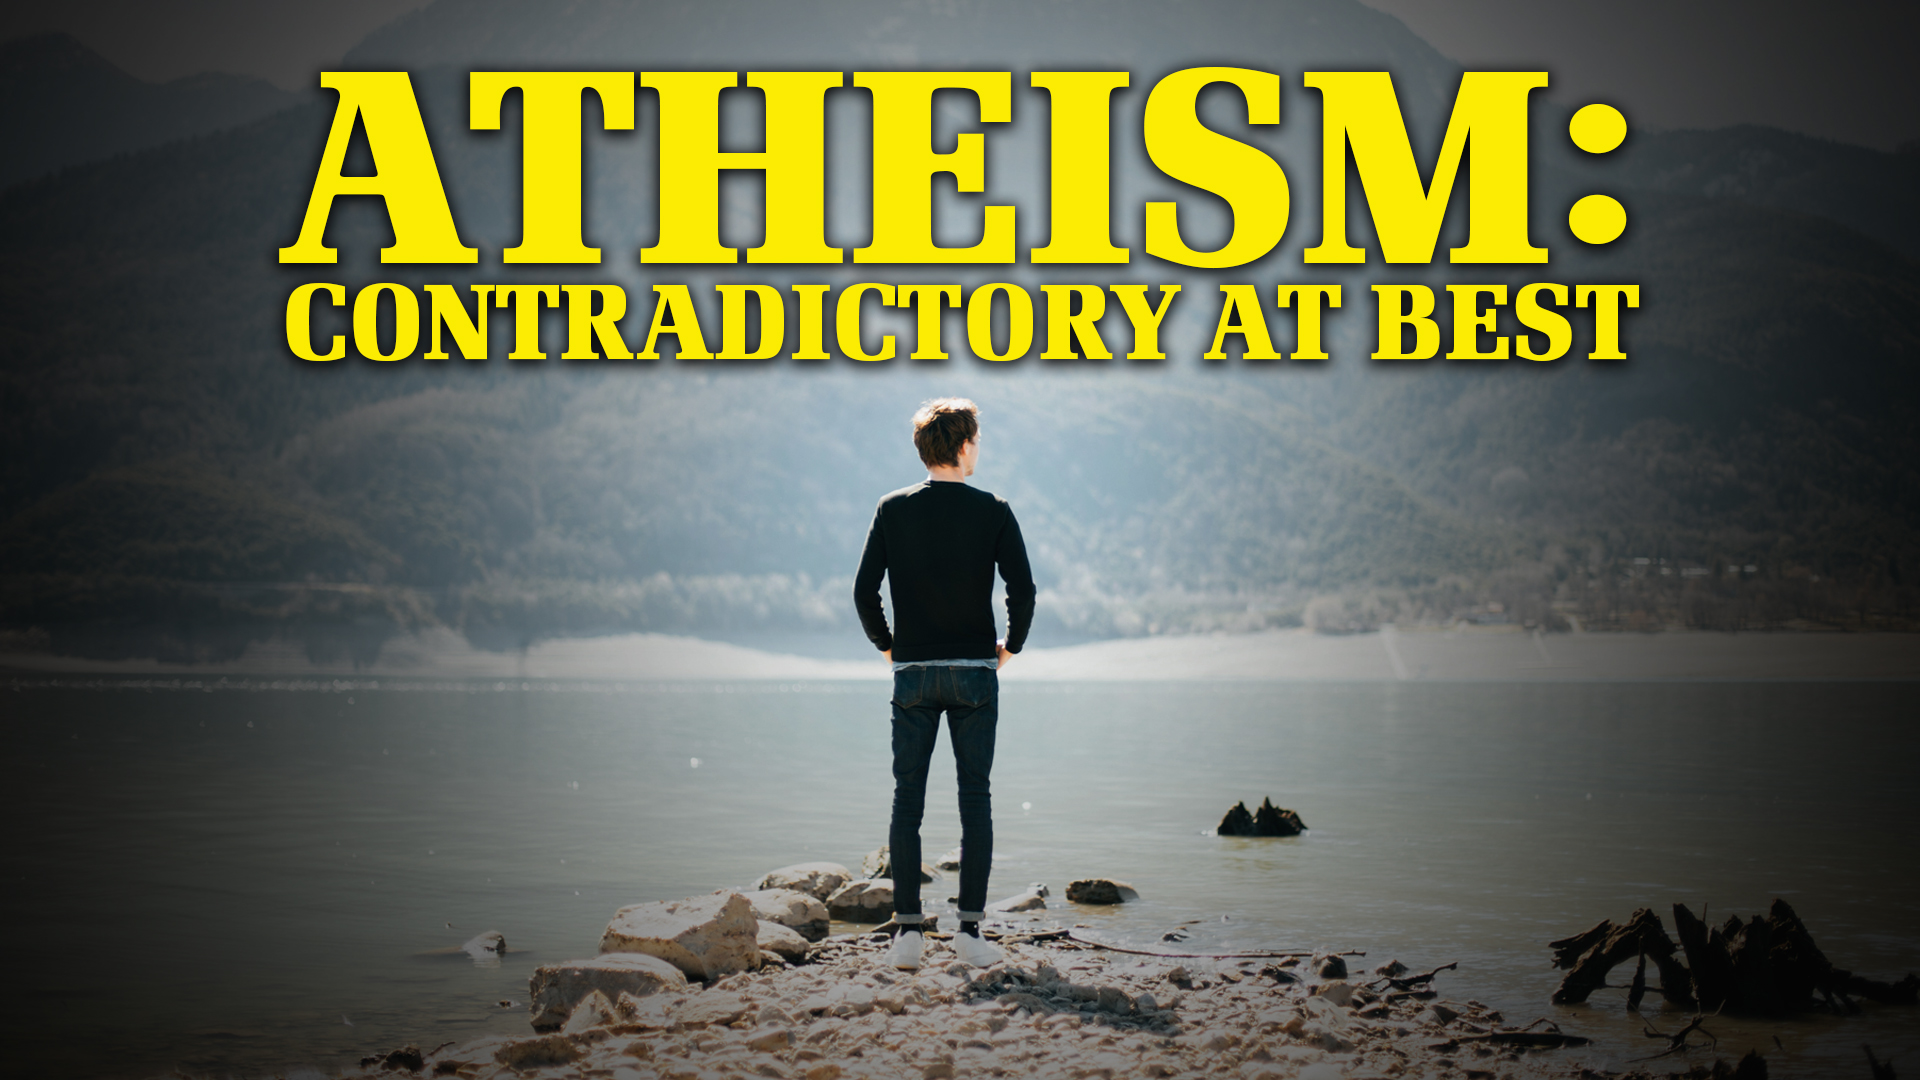 Ateism: Contradictory at Best